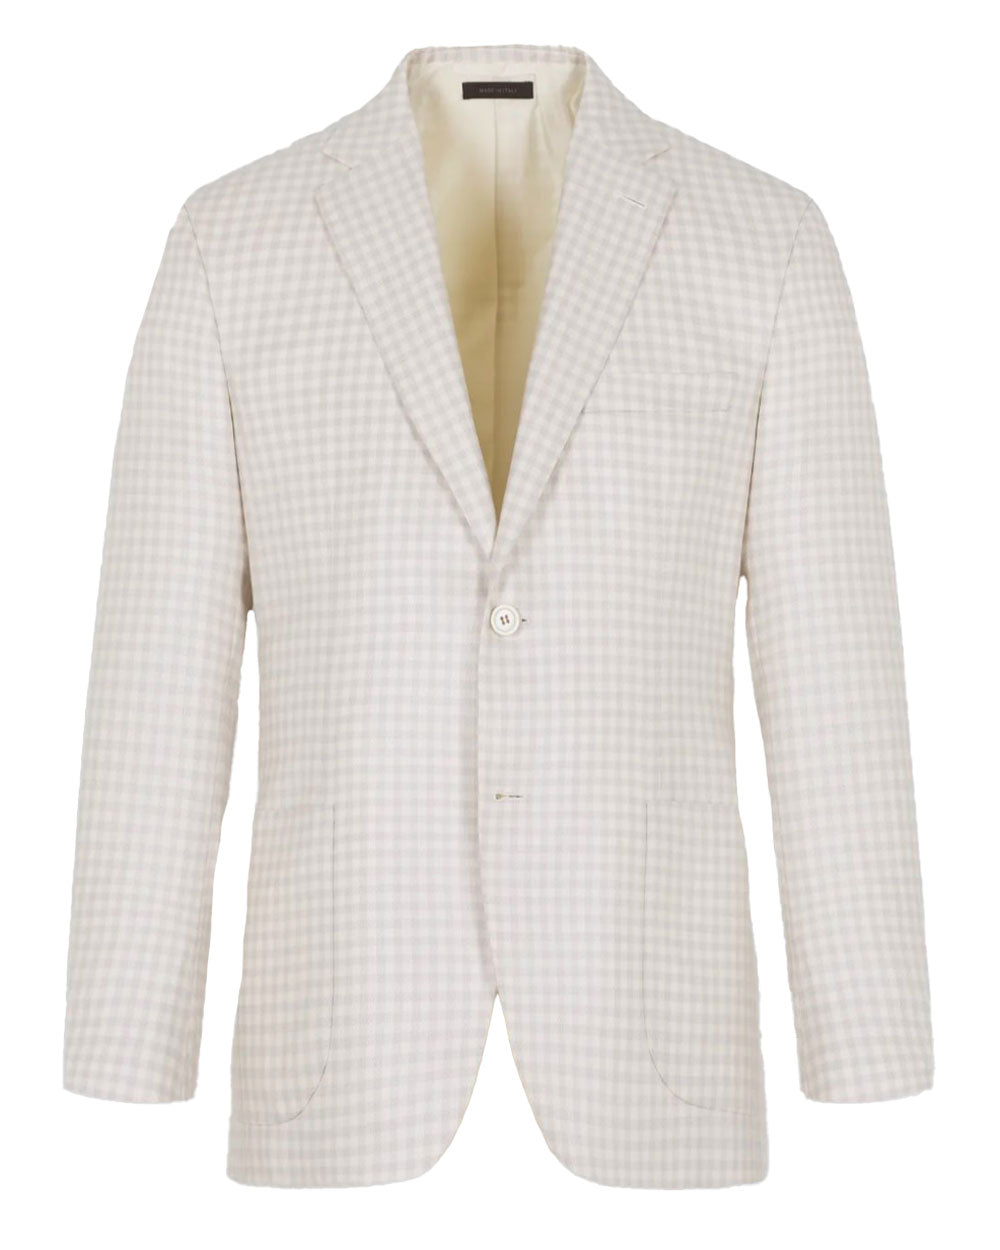 Ivory and Grey Checked Sportcoat